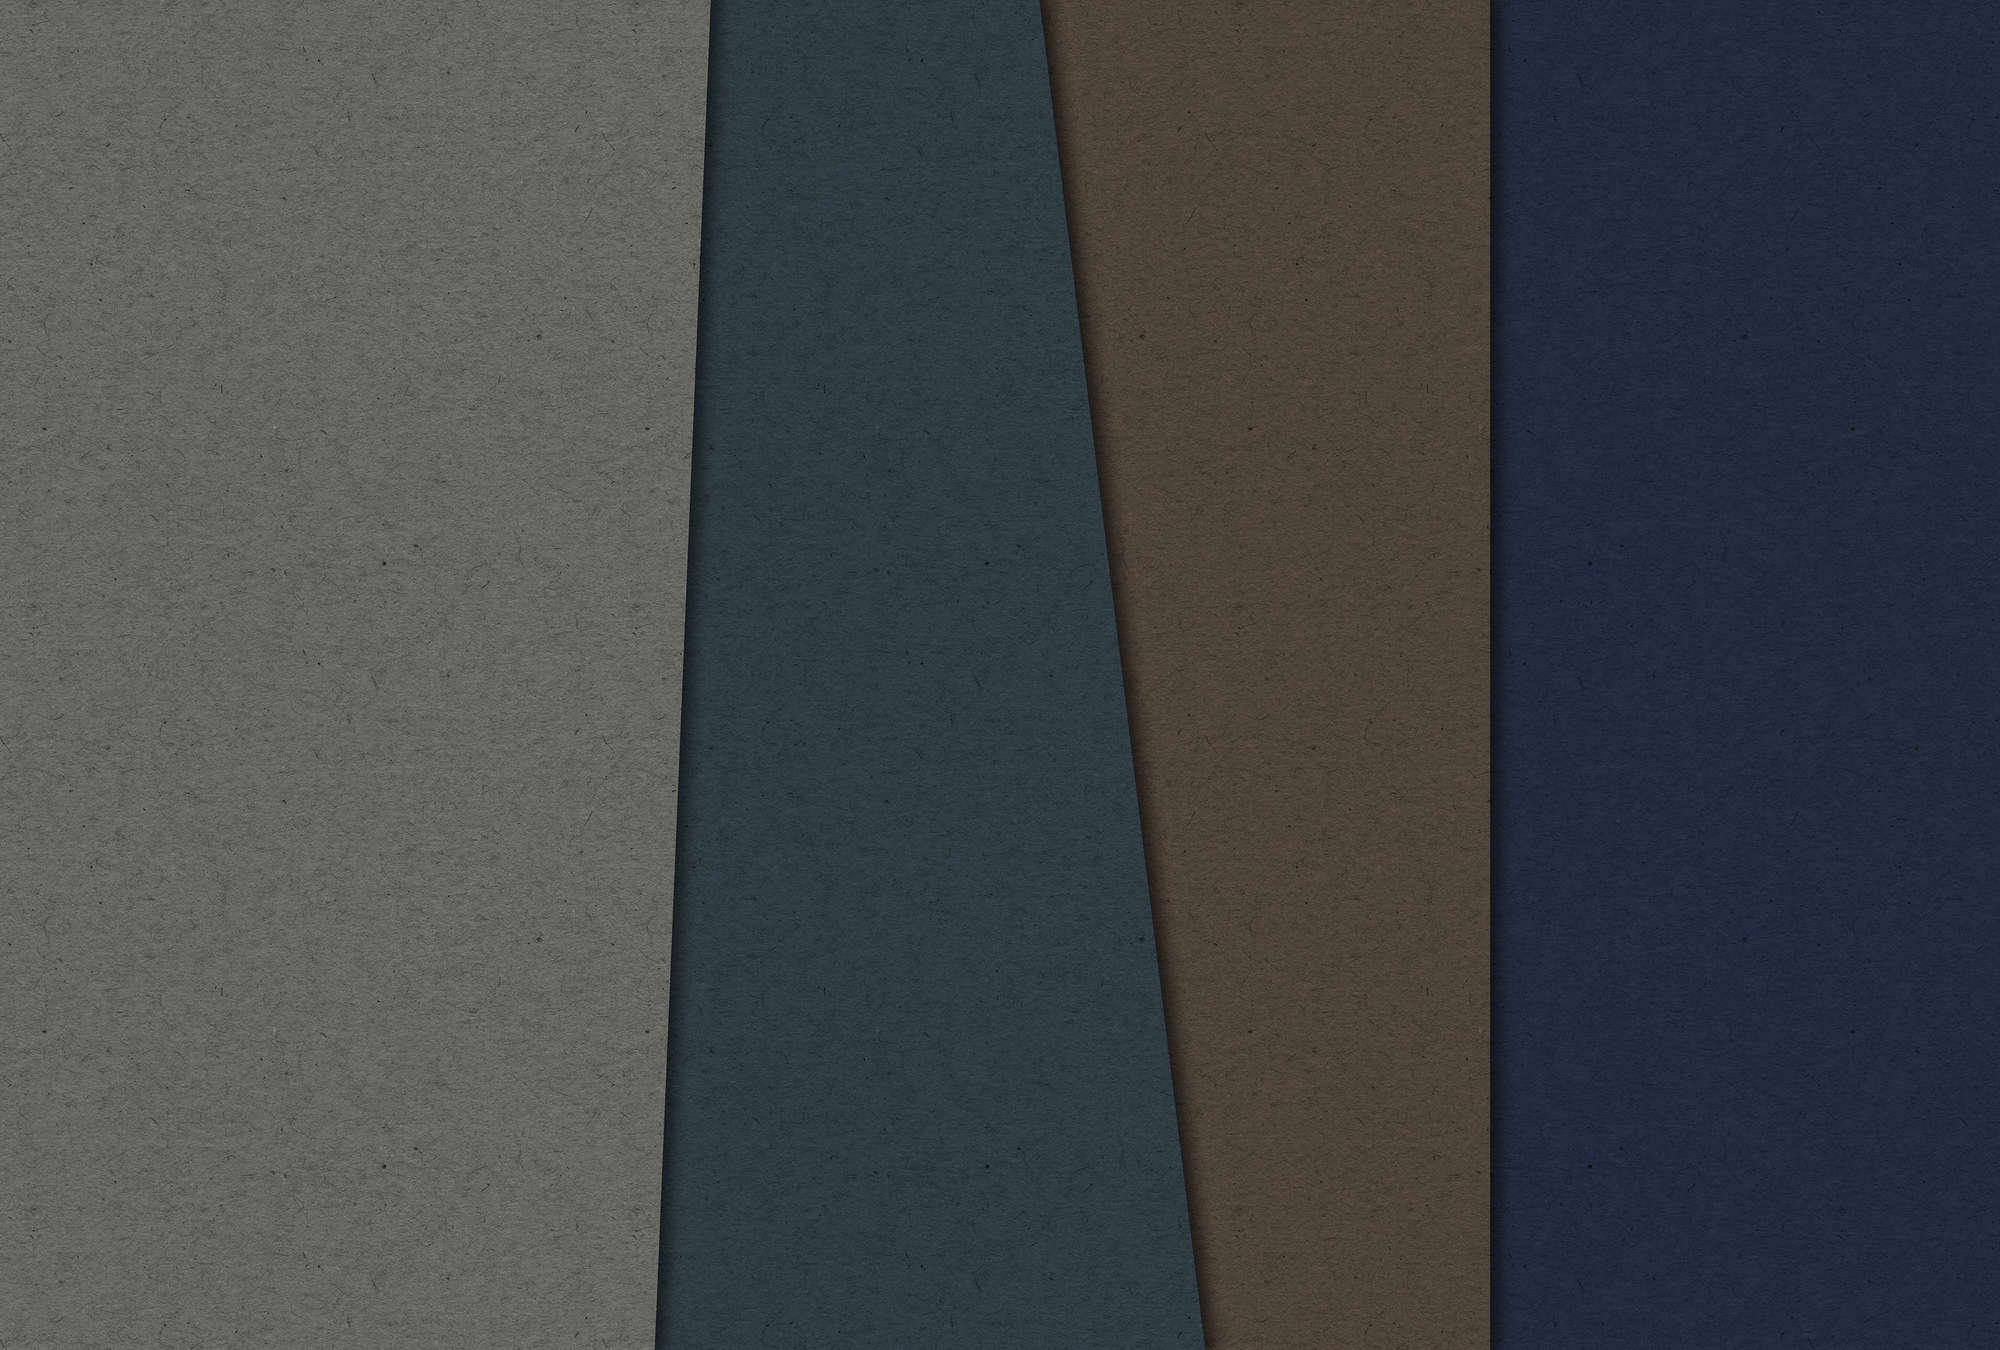             Layered Cardboard 2 - Photo wallpaper in cardboard structure with dark colour fields - Blue, Brown | Pearl smooth fleece
        